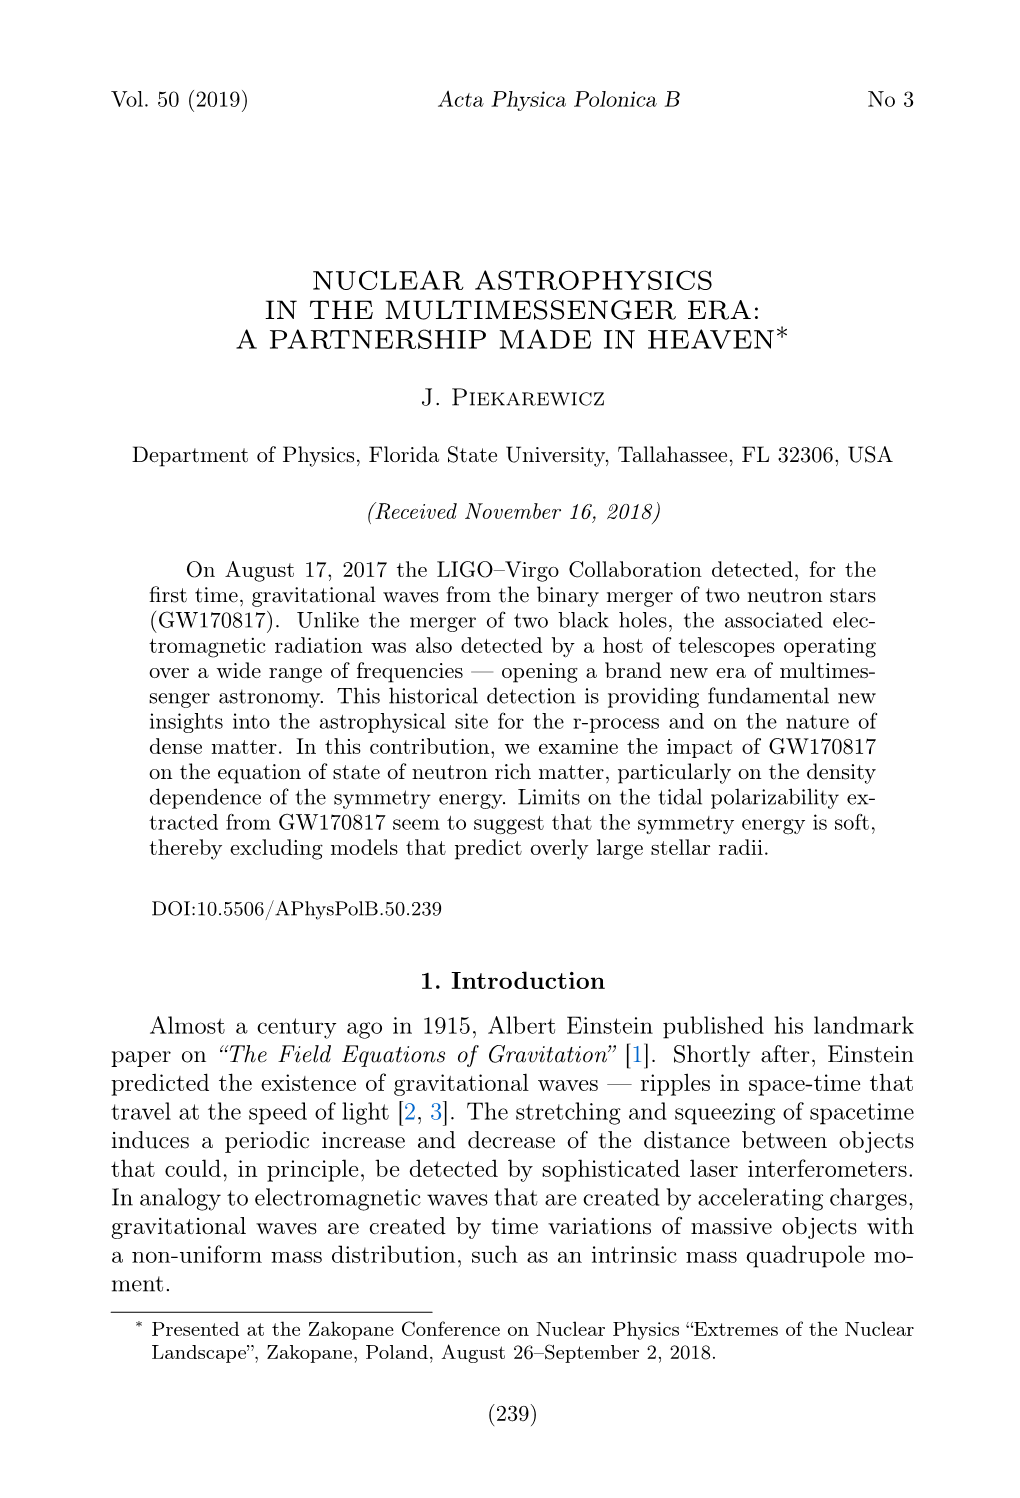 Nuclear Astrophysics in the Multimessenger Era: a Partnership Made in Heaven∗